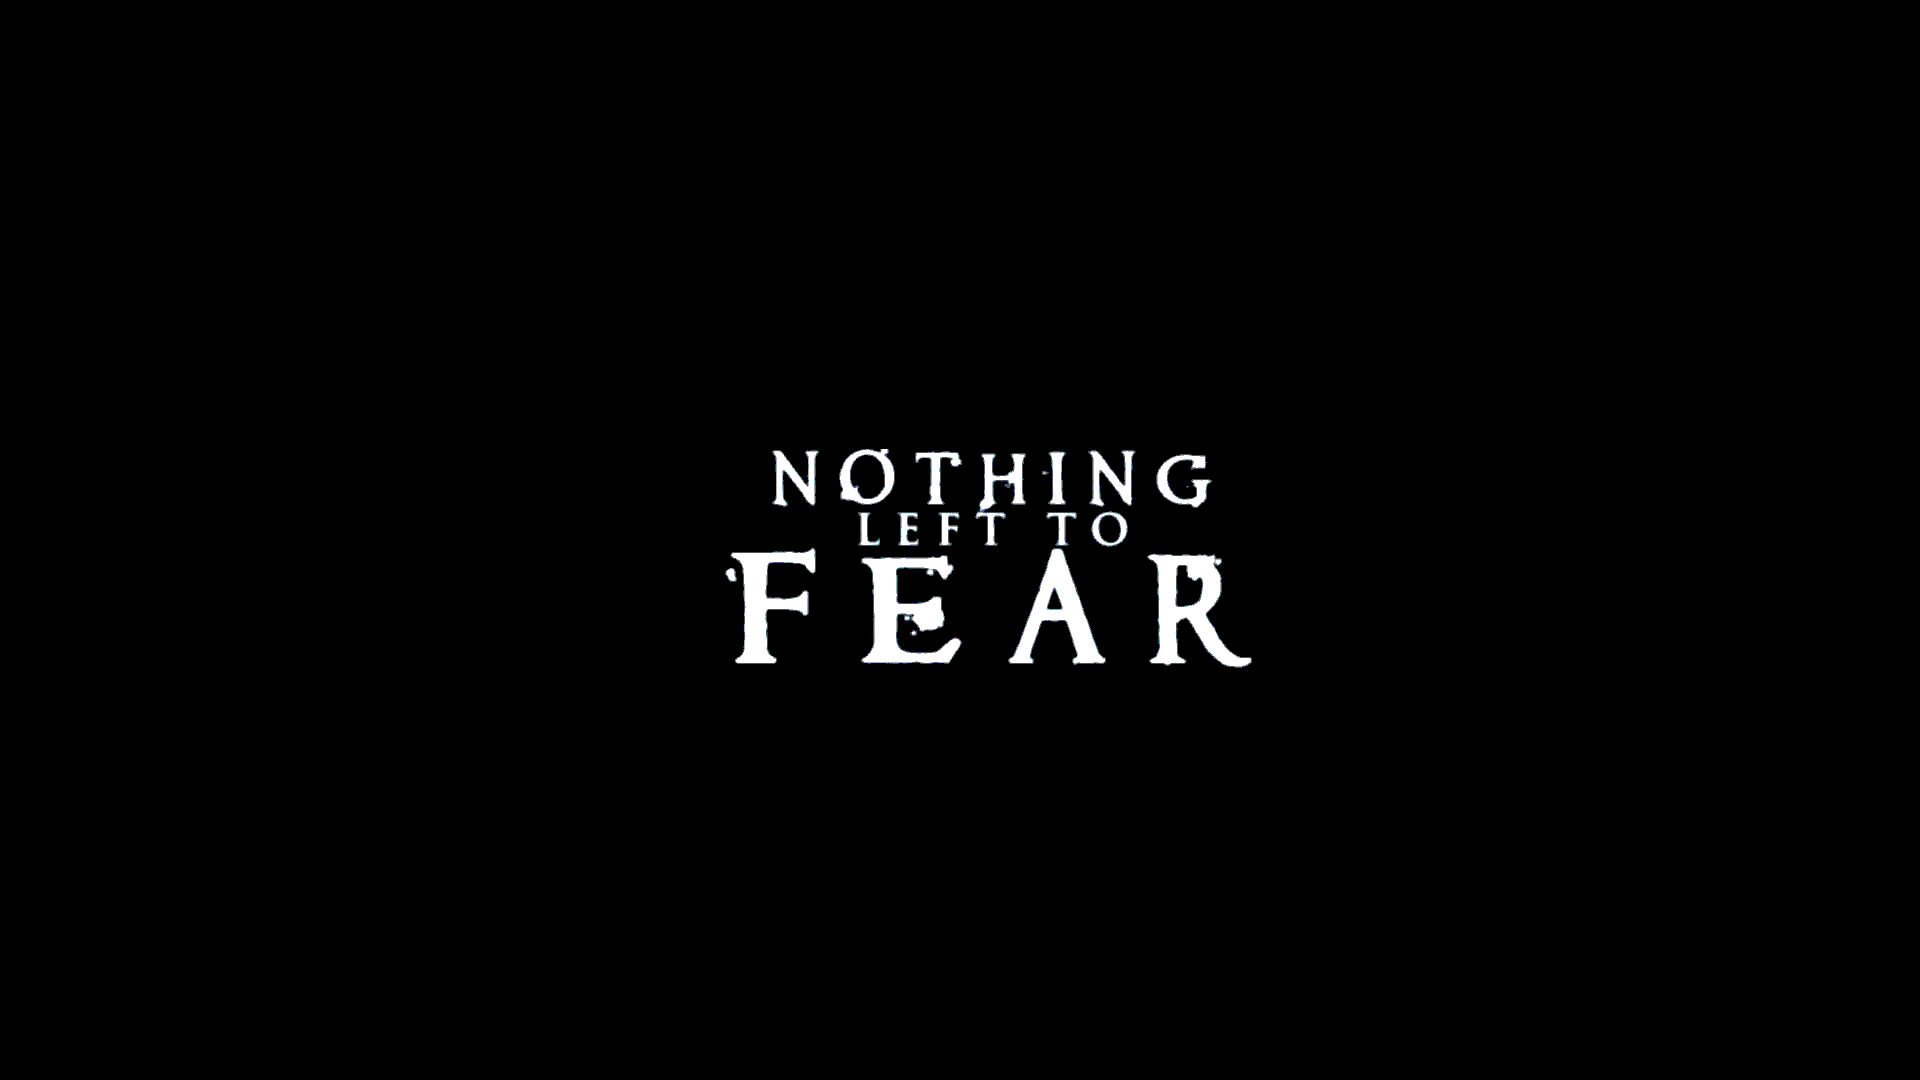 NOTHING-LEFT-TO-FEAR dark horror supernatural nothing left fear ...